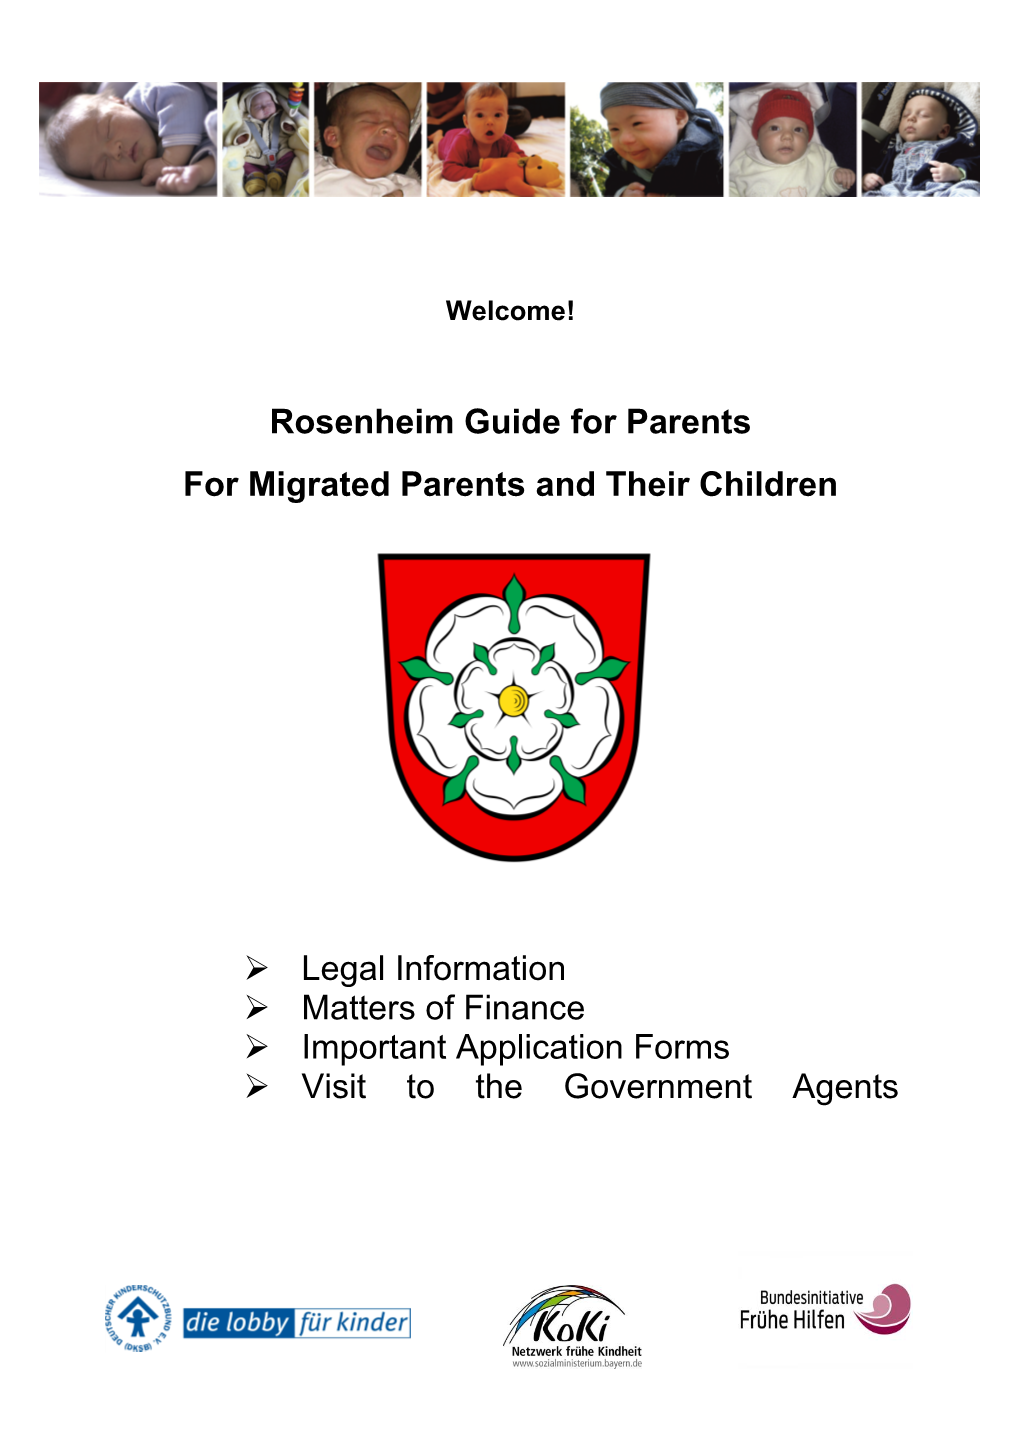 Rosenheim Guide for Parents for Migrated Parents and Their Children